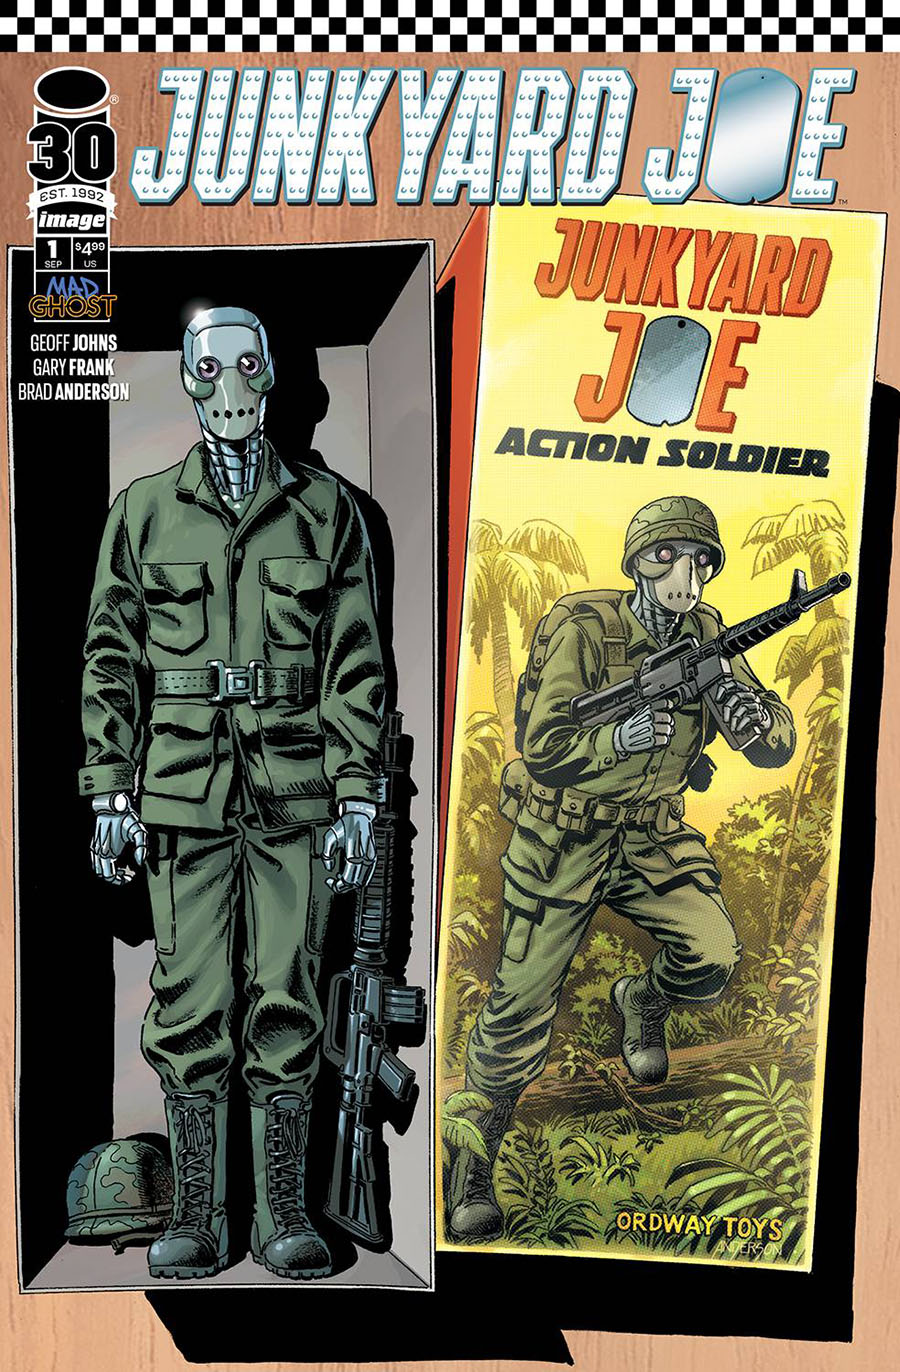 Junkyard Joe #1 Cover D Variant Jerry Ordway & Brad Anderson Cover